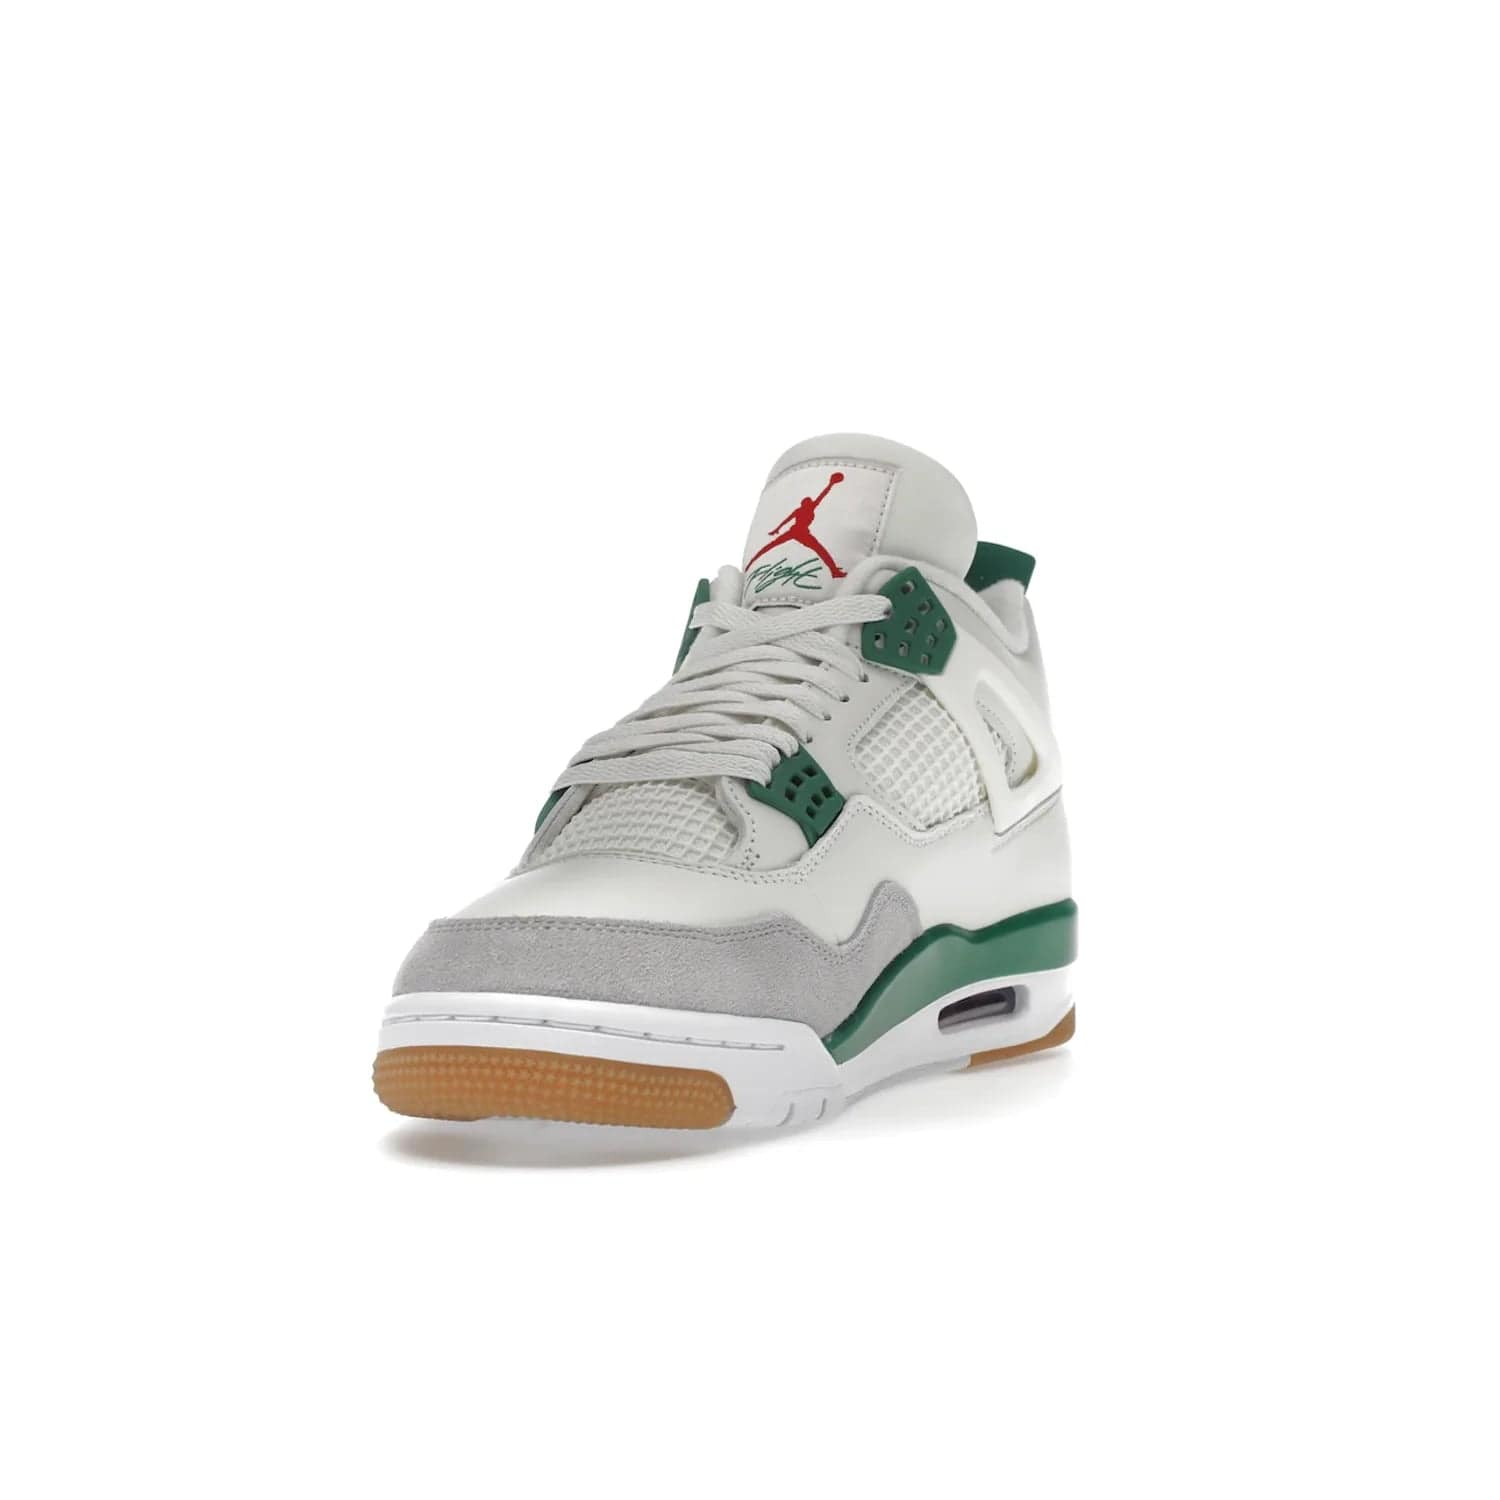 Jordan 4 Retro SB Pine Green - Image 13 - Only at www.BallersClubKickz.com - A white leather upper combined with a Neutral Grey suede mudguard gives this limited Air Jordan 4 Retro SB Pine Green sneaker its unmistakable style. Released March 20, 2023, the Jordan 4 Retro SB features a white and Pine Green midsole plus a red air unit with a gum outsole for grip. The perfect blend of Nike SB skateboarding and Jordan 4 classic design.